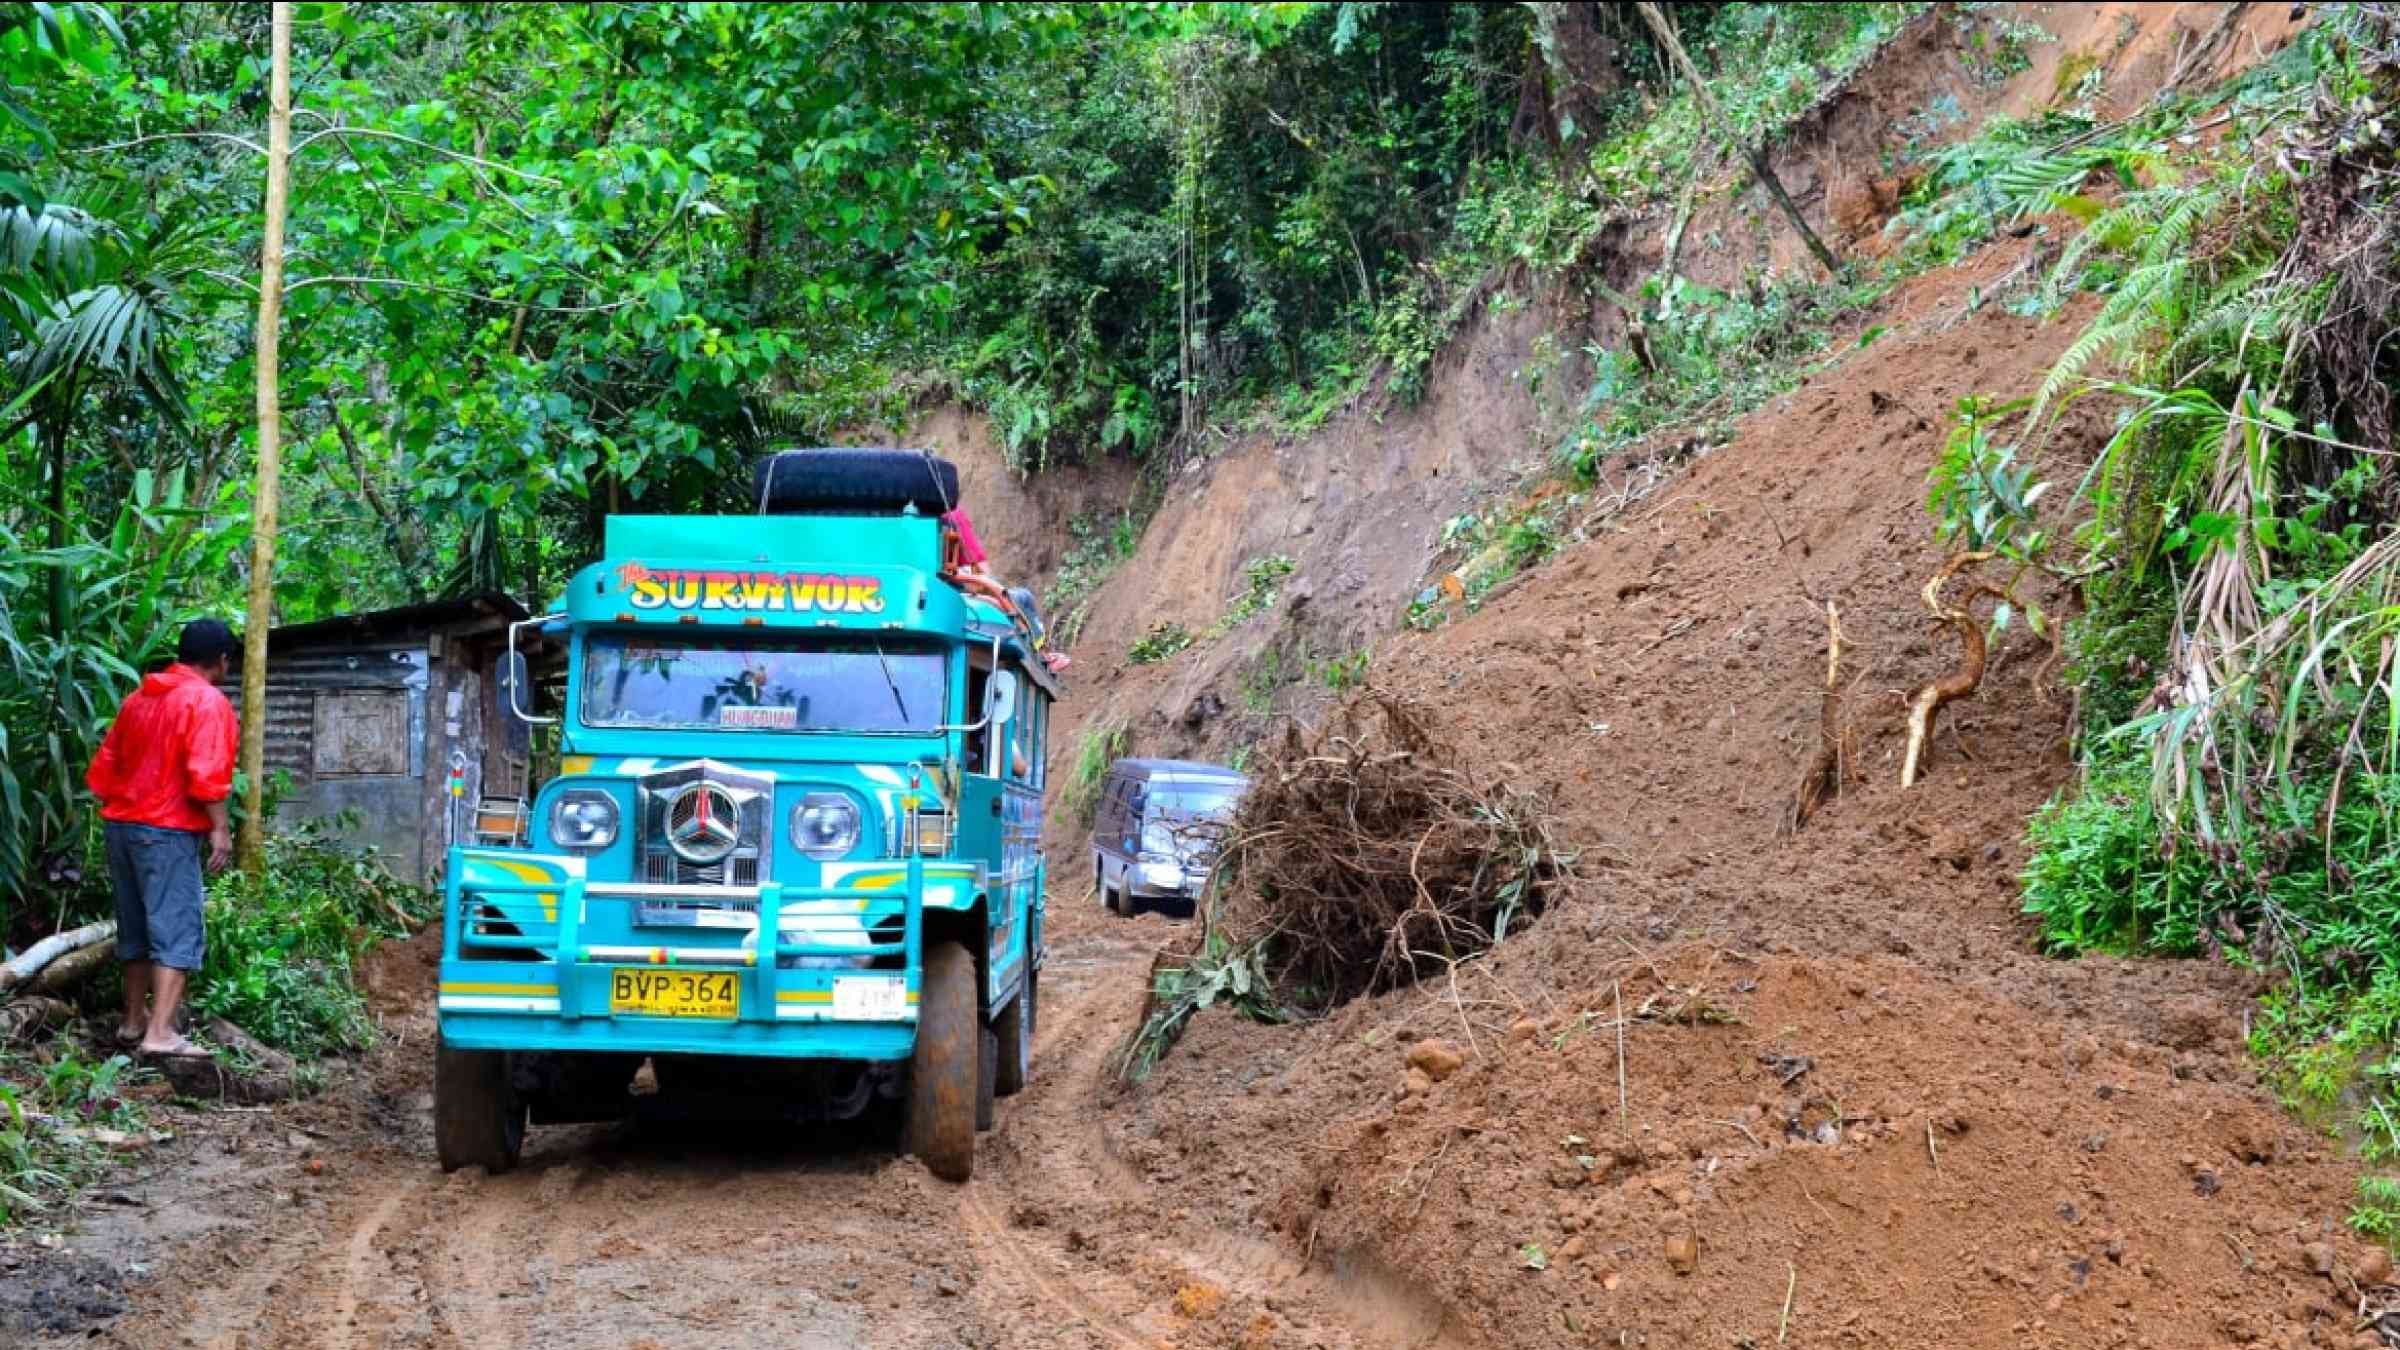 Landslide on the way from Hapao village in Banaue province in the Philippines, affecting the road taken by a bus